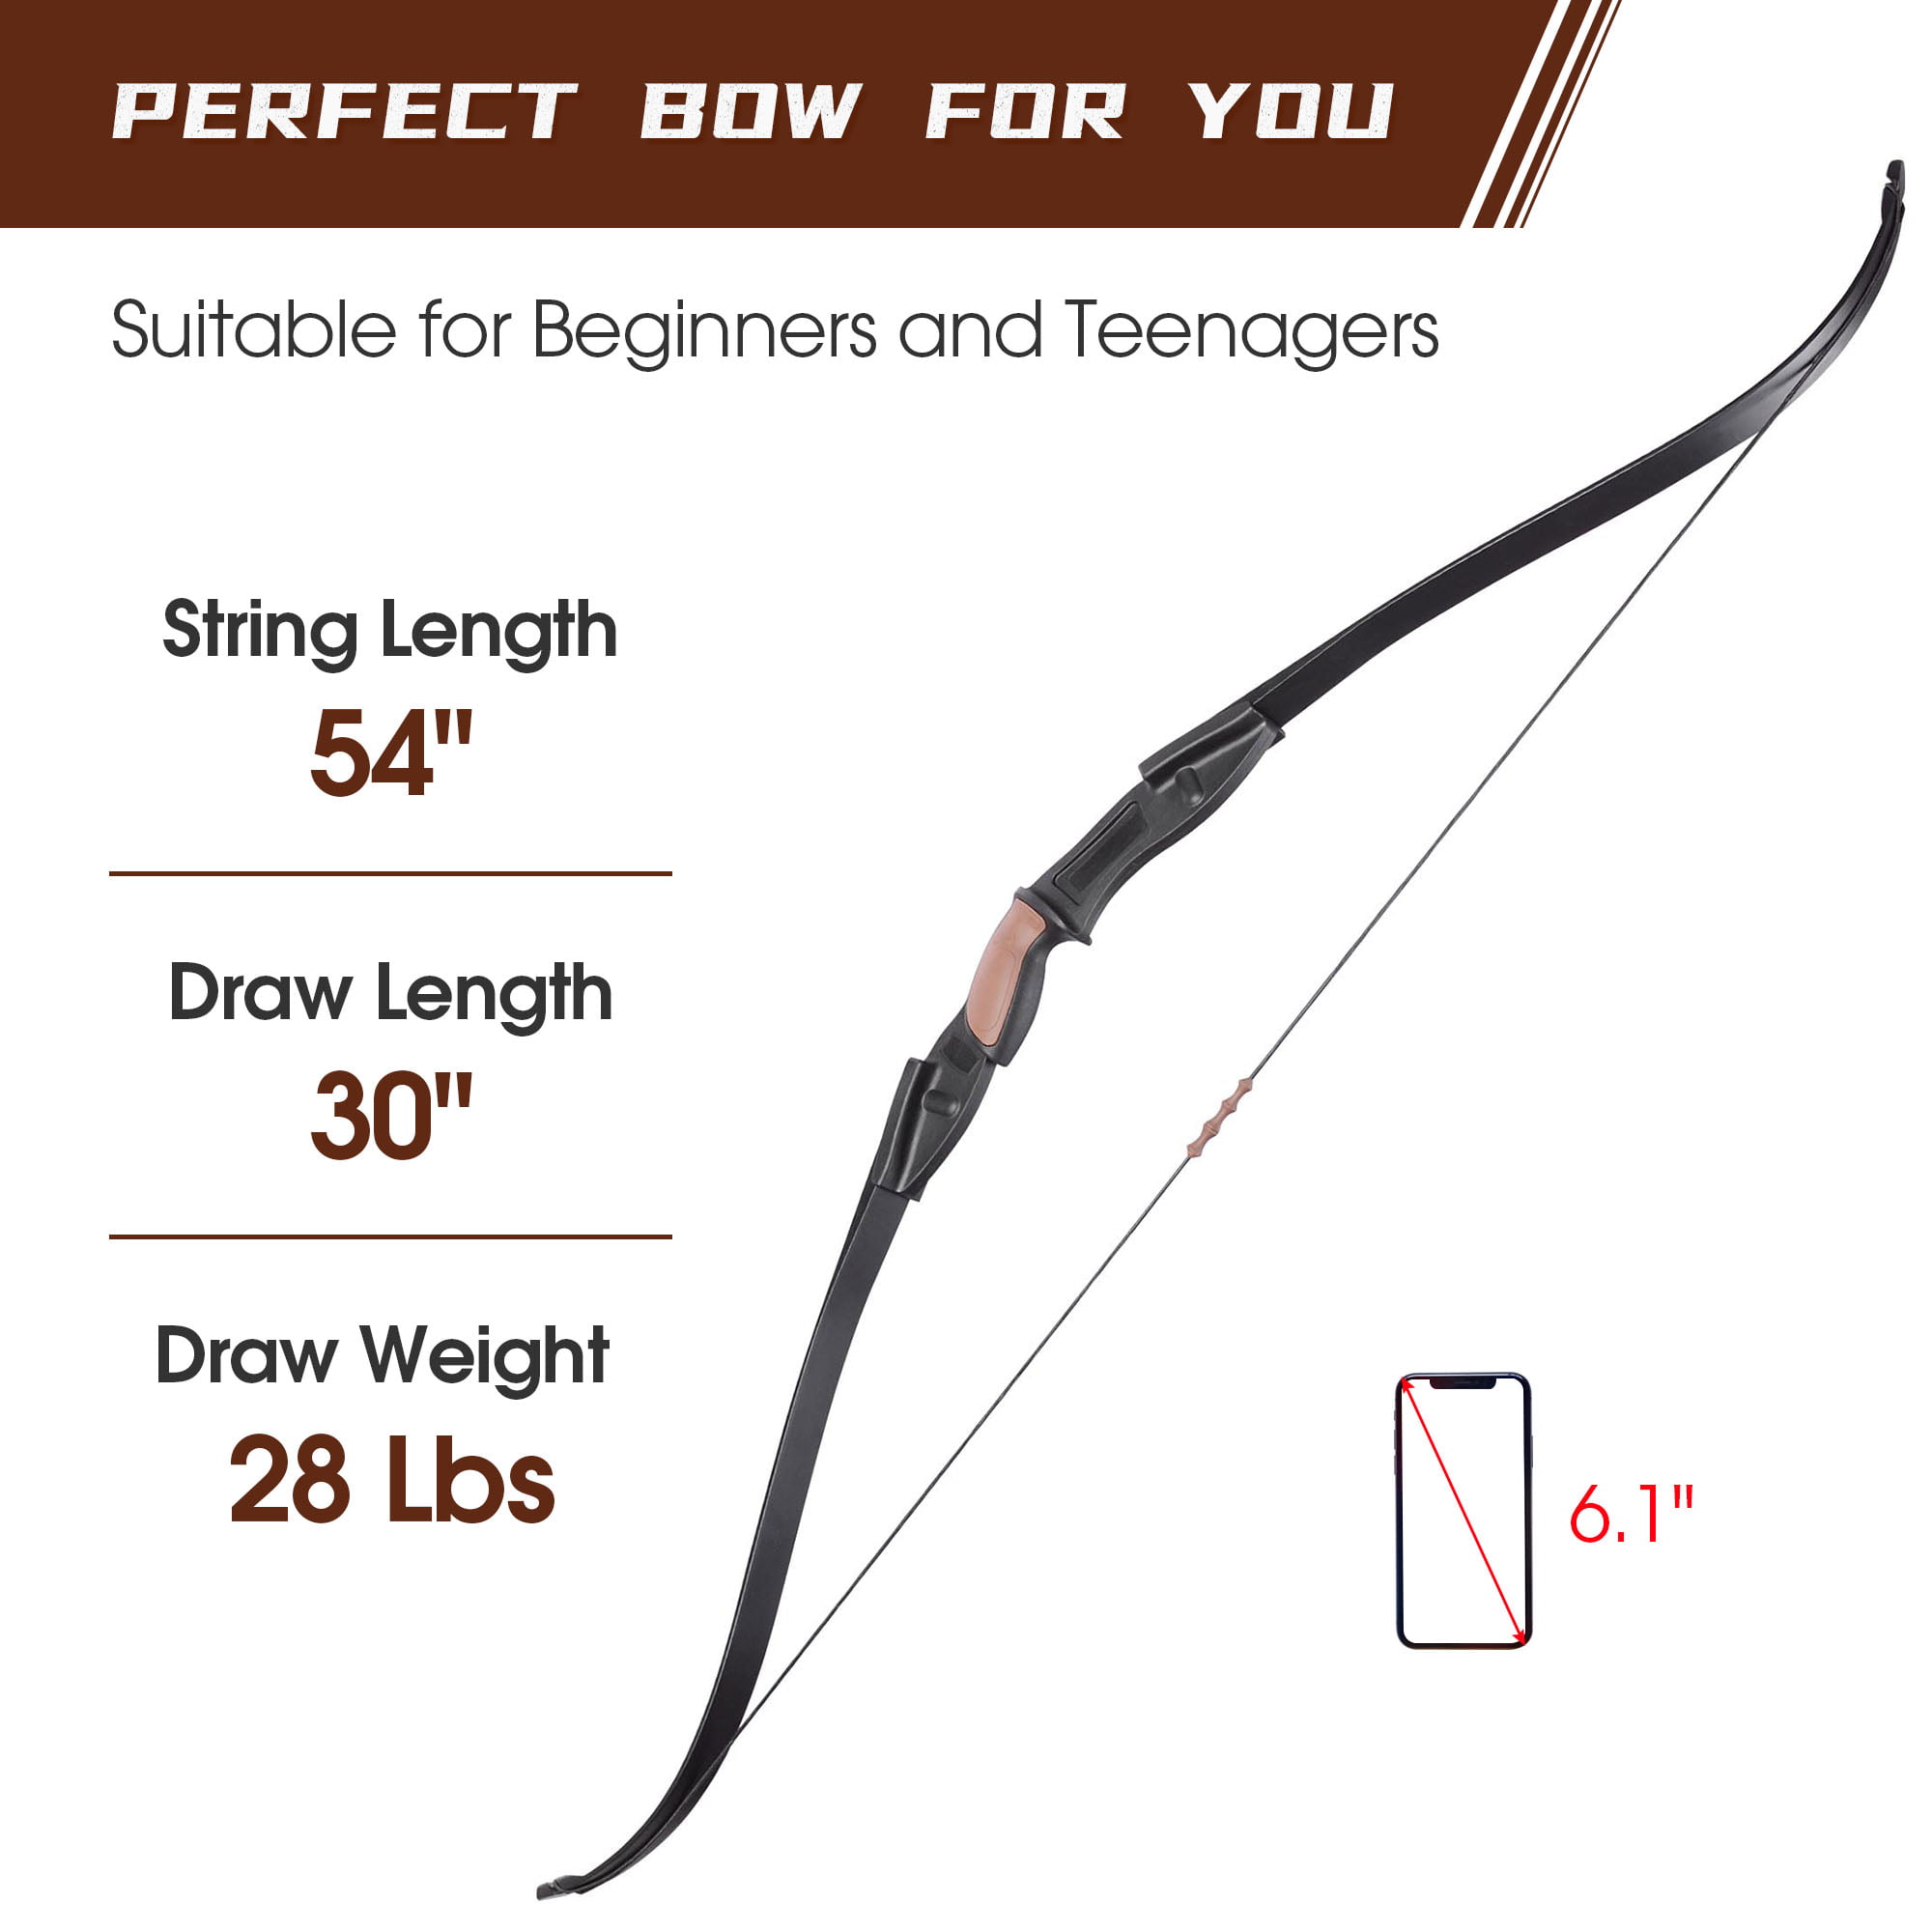 ABS Takedown Recurve Bow Set Black/Camo Youth Shooting Hunting Practice Games 